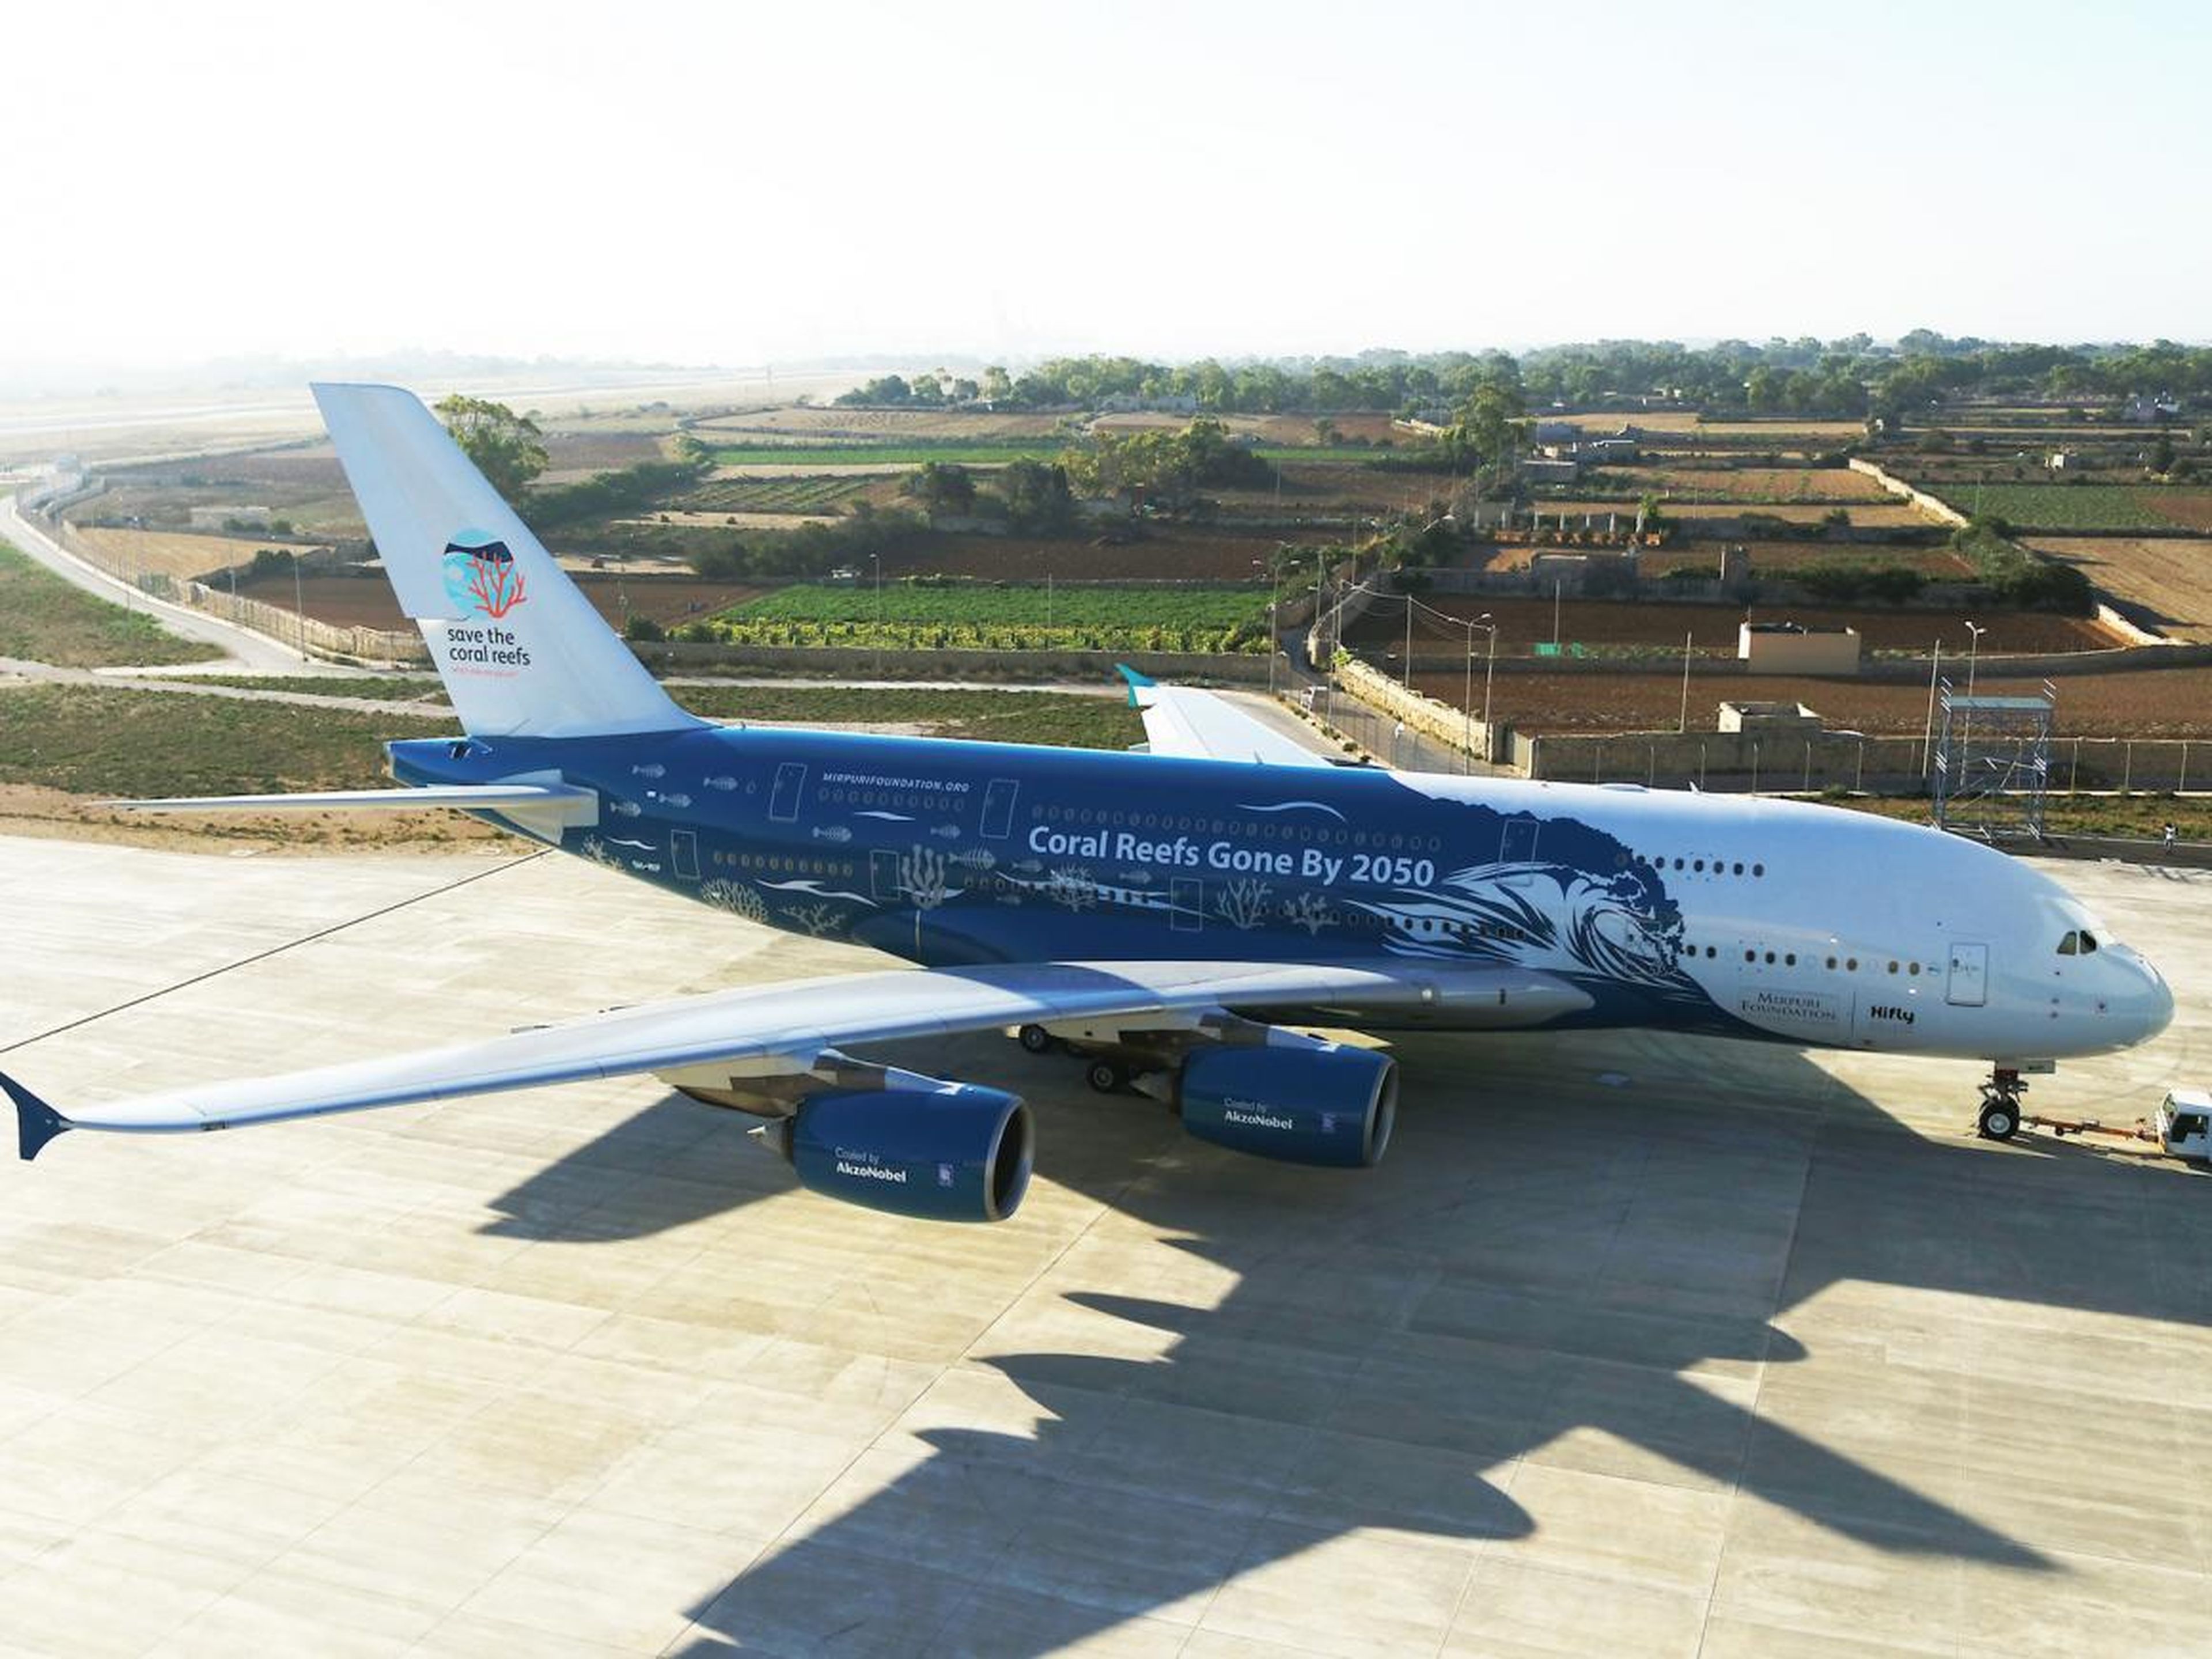 Portugal's HiFly became the first airline to operate a second-hand A380 when it took delivery of an ex-Singapore Airlines jet in the summer of 2018.